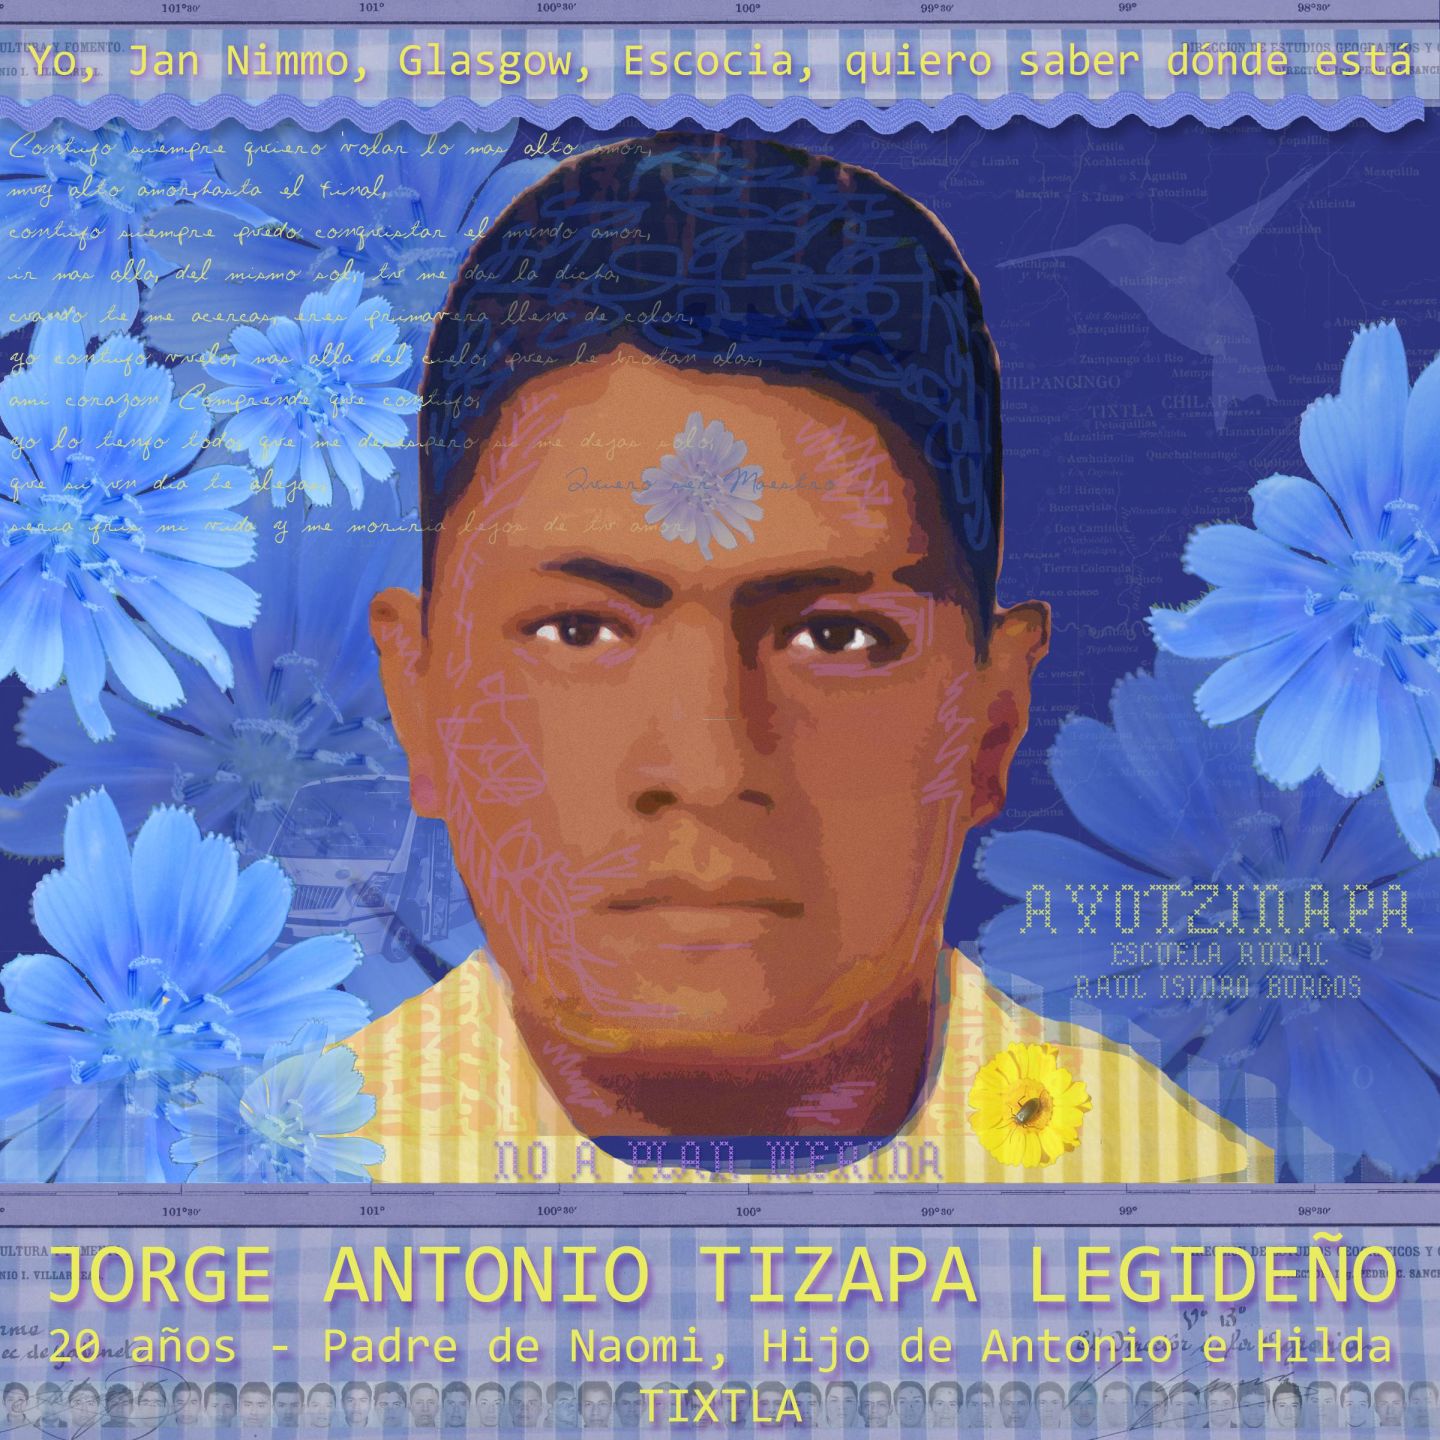 A tribute to Mexico's disappeared amidst demands for the truth 27